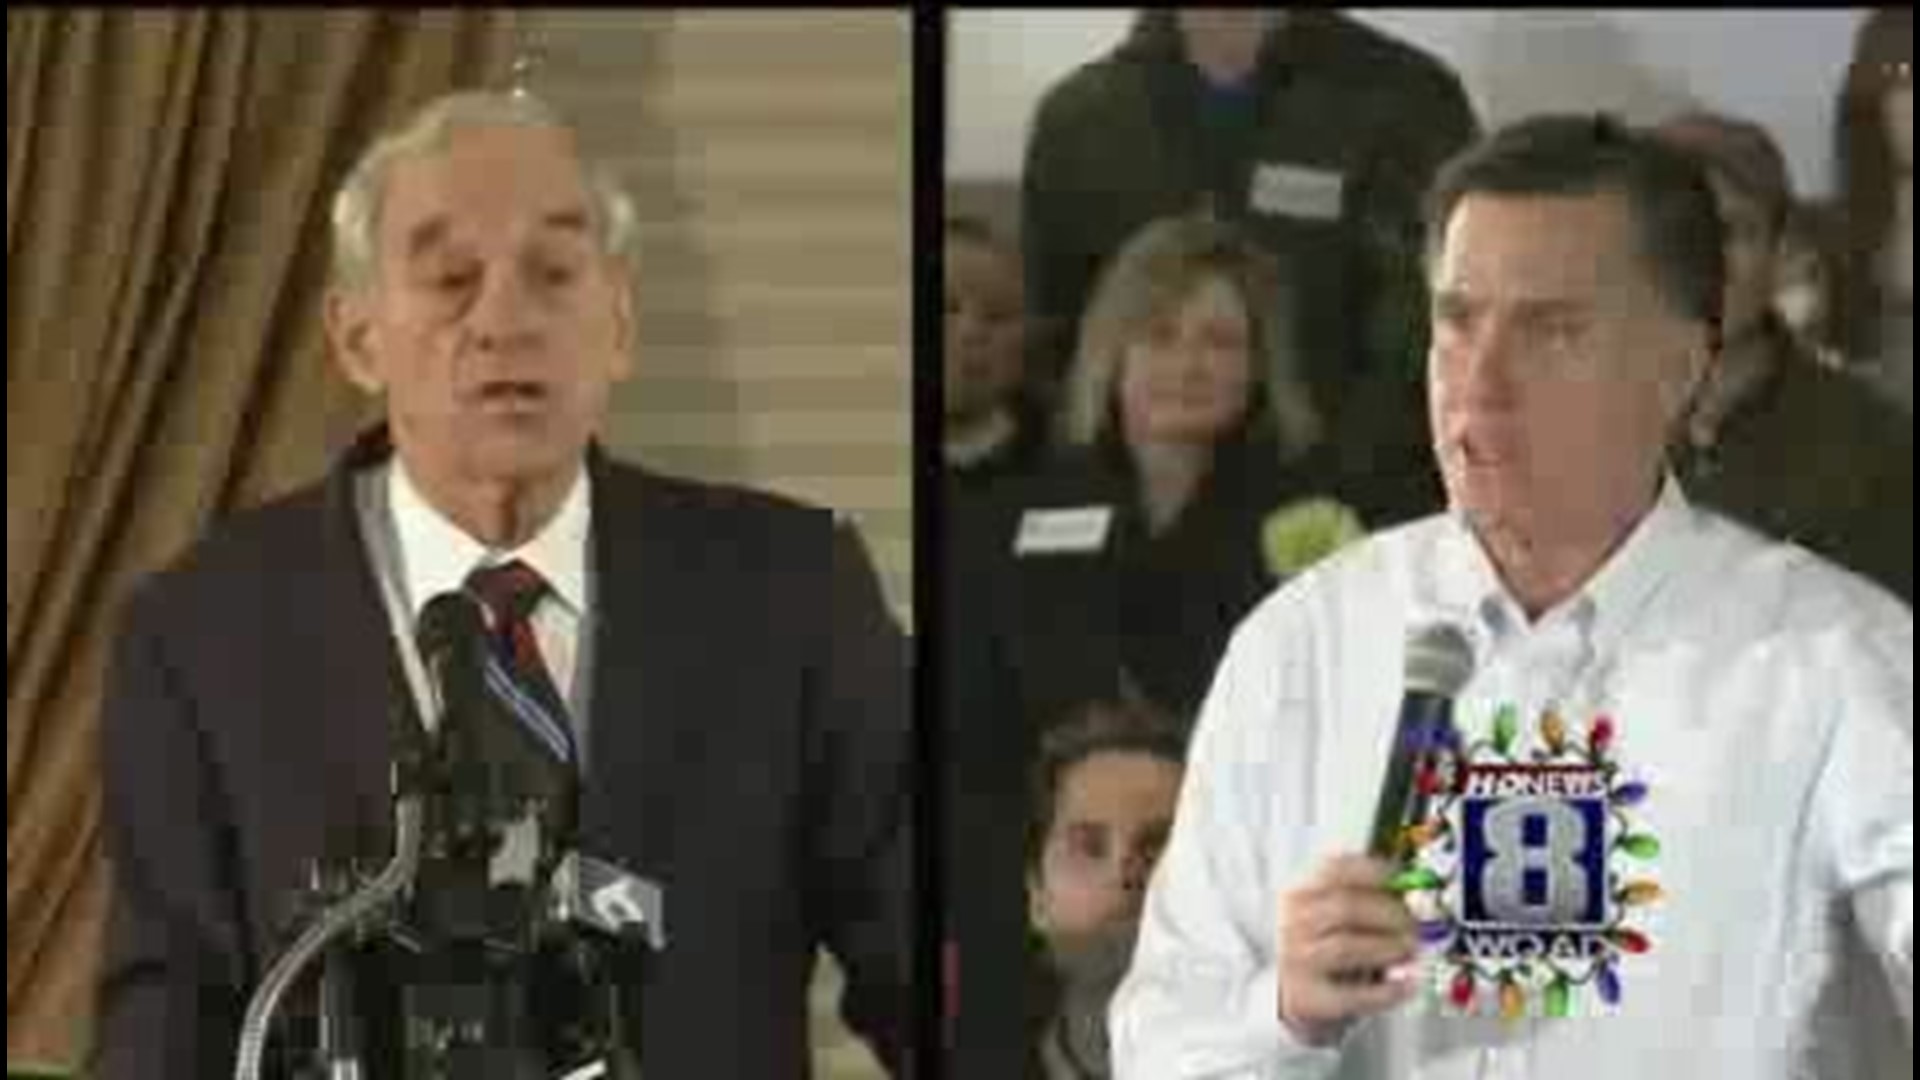 Candidates Romney and Paul make stops in Davenport